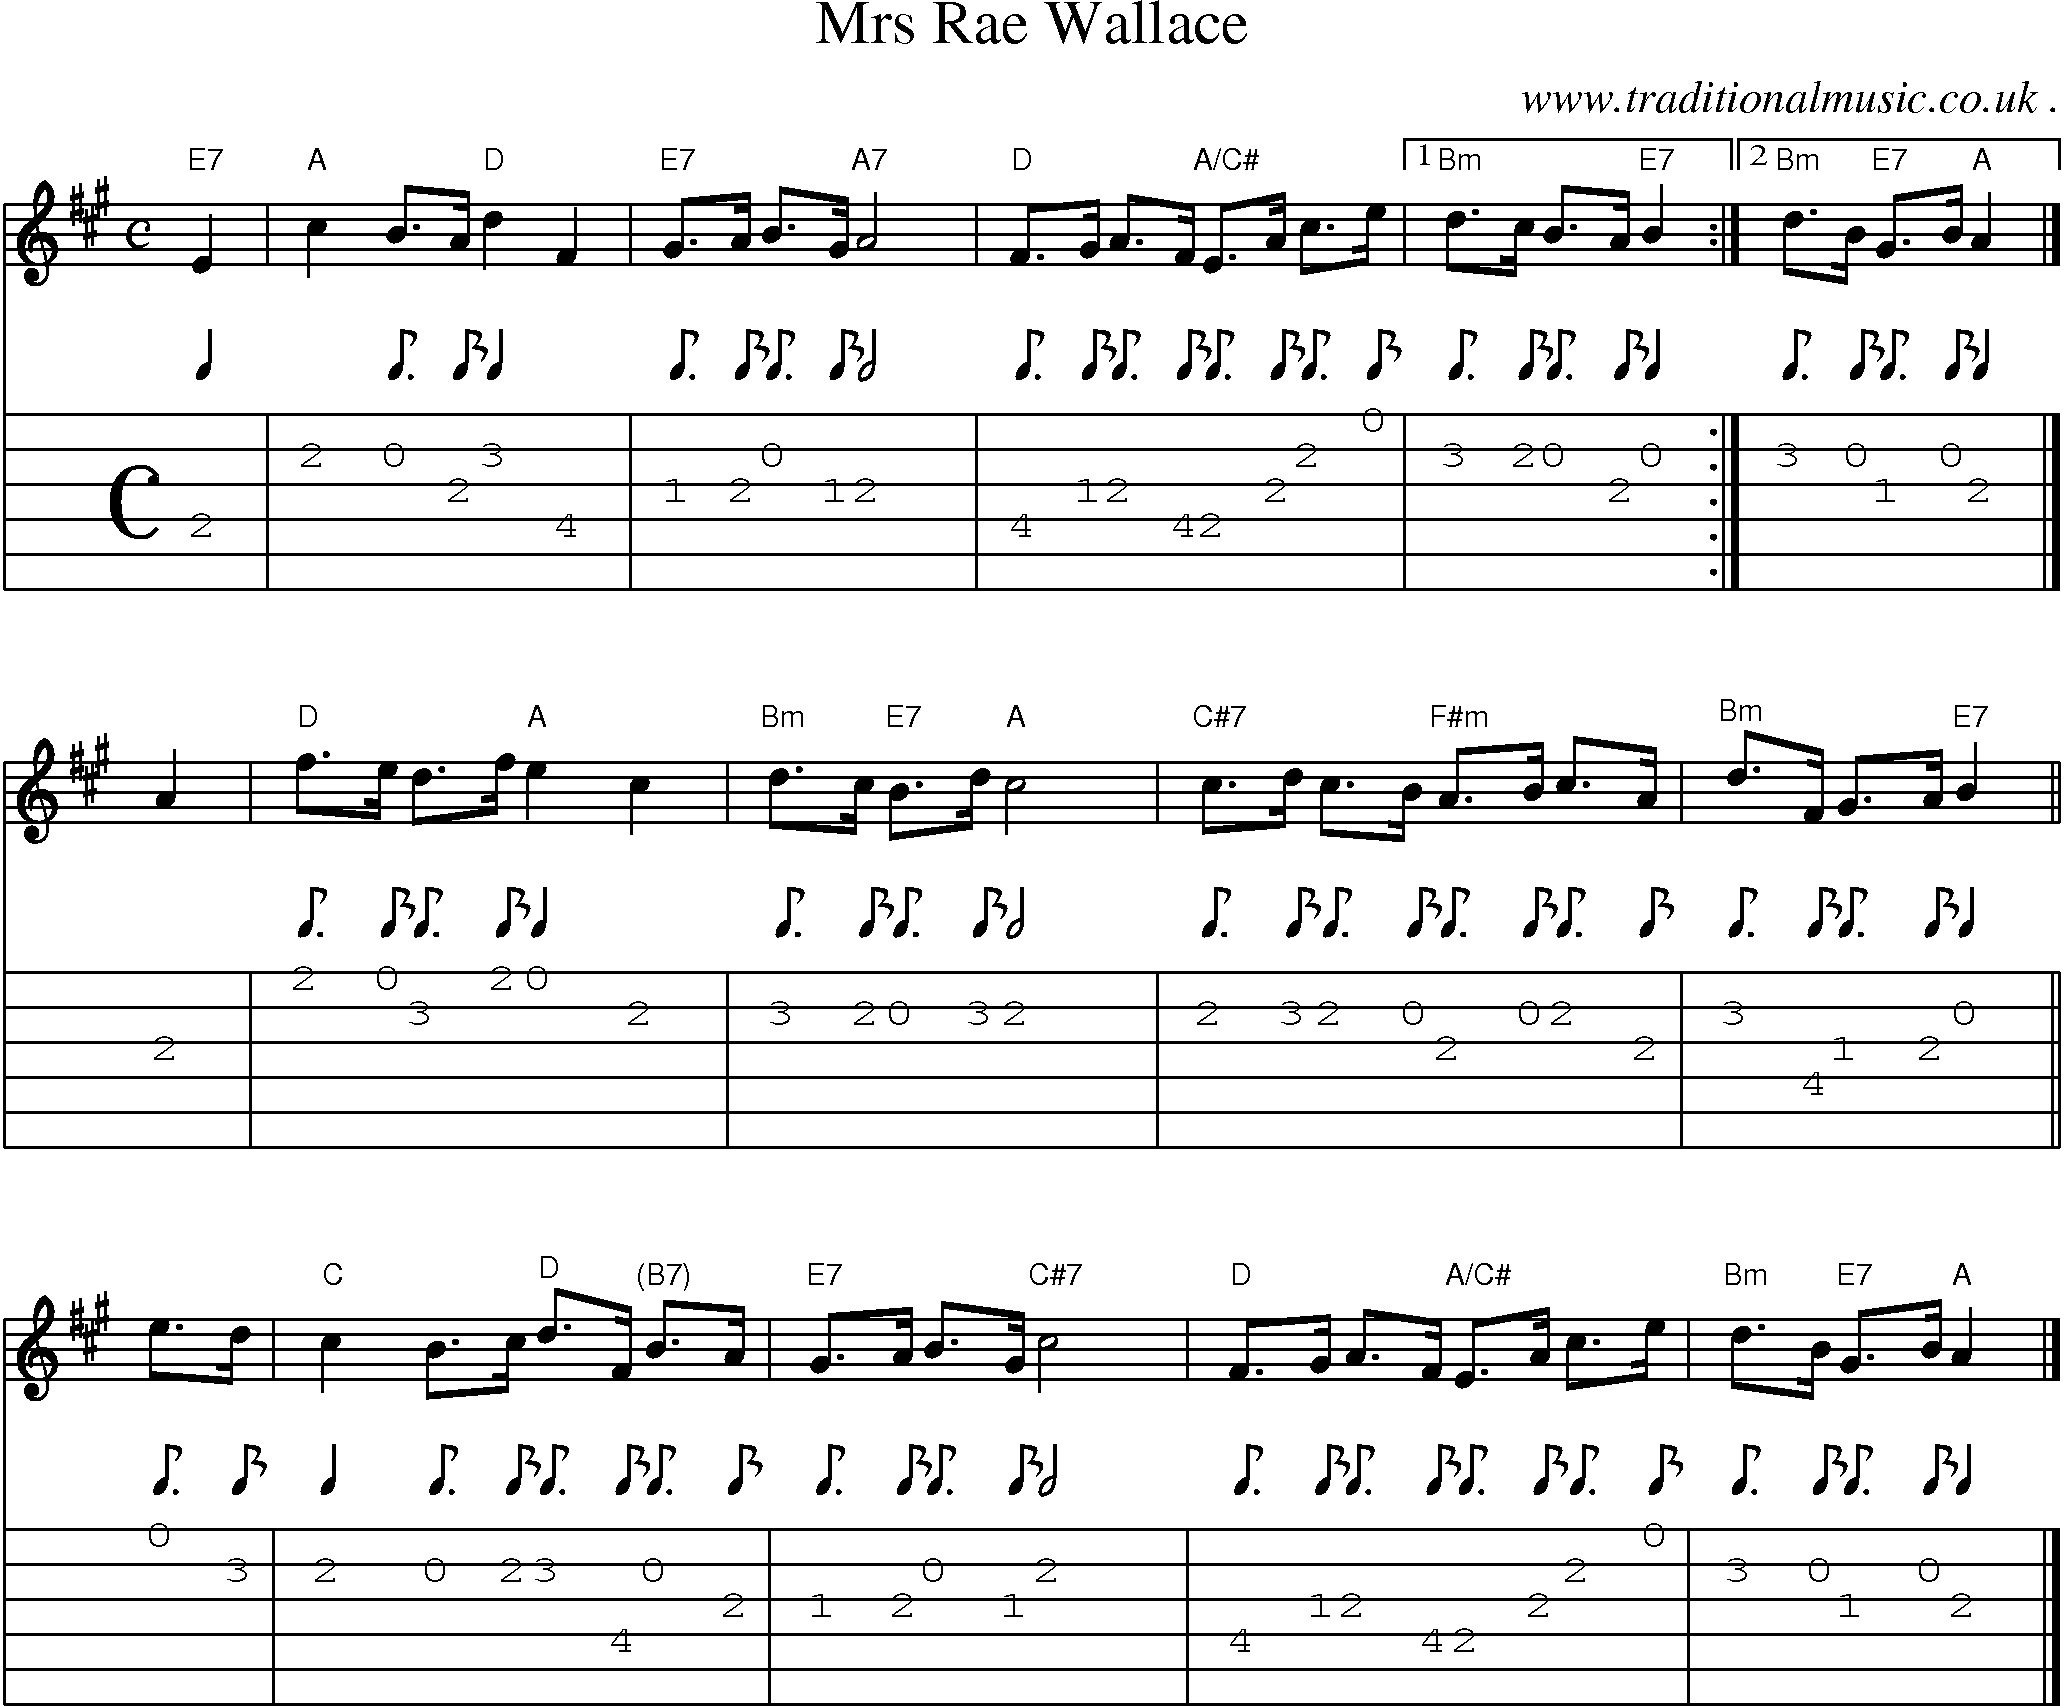 Sheet-music  score, Chords and Guitar Tabs for Mrs Rae Wallace